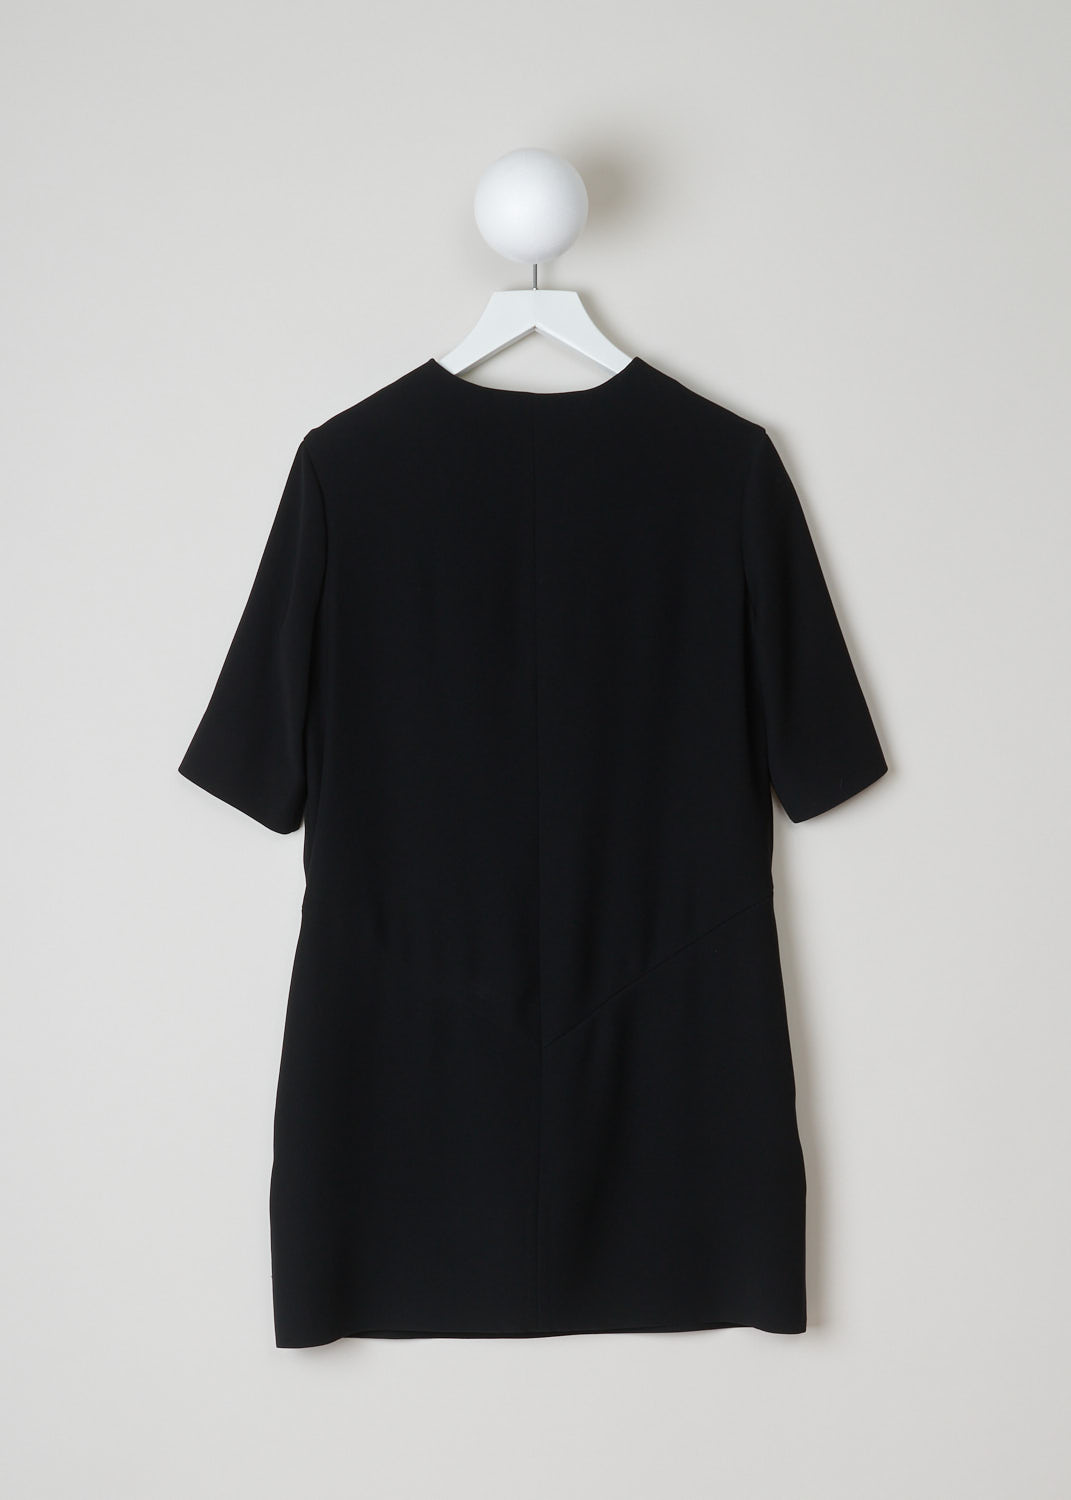 Balenciaga, Midi black shift dress, 384112_TFDD7_1000, black, back. Featuring a decollete with split at the front. Combined with a round neckline and short sleeves. The length of this model sits just above the knees and as your fastening option this model has a metal clip on the front which allows for a easy entry of exit. 